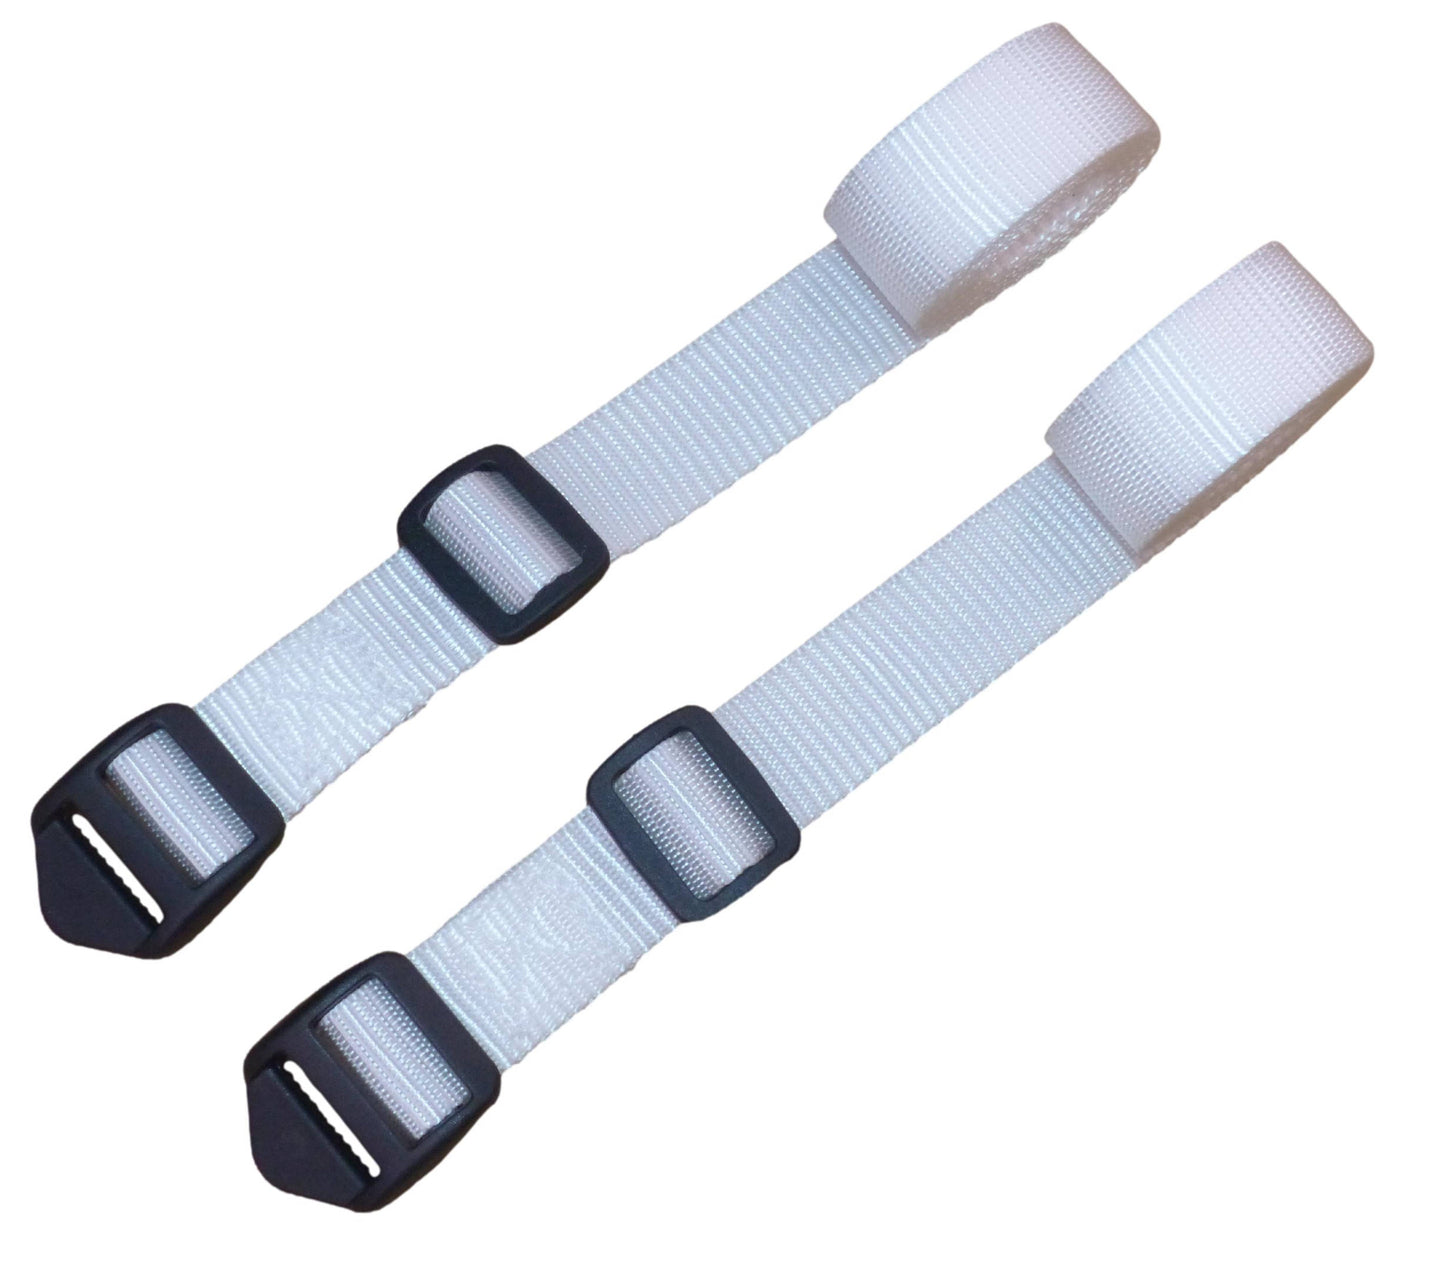 The Benristraps 25mm Camping Straps, 150cm (pair) in white